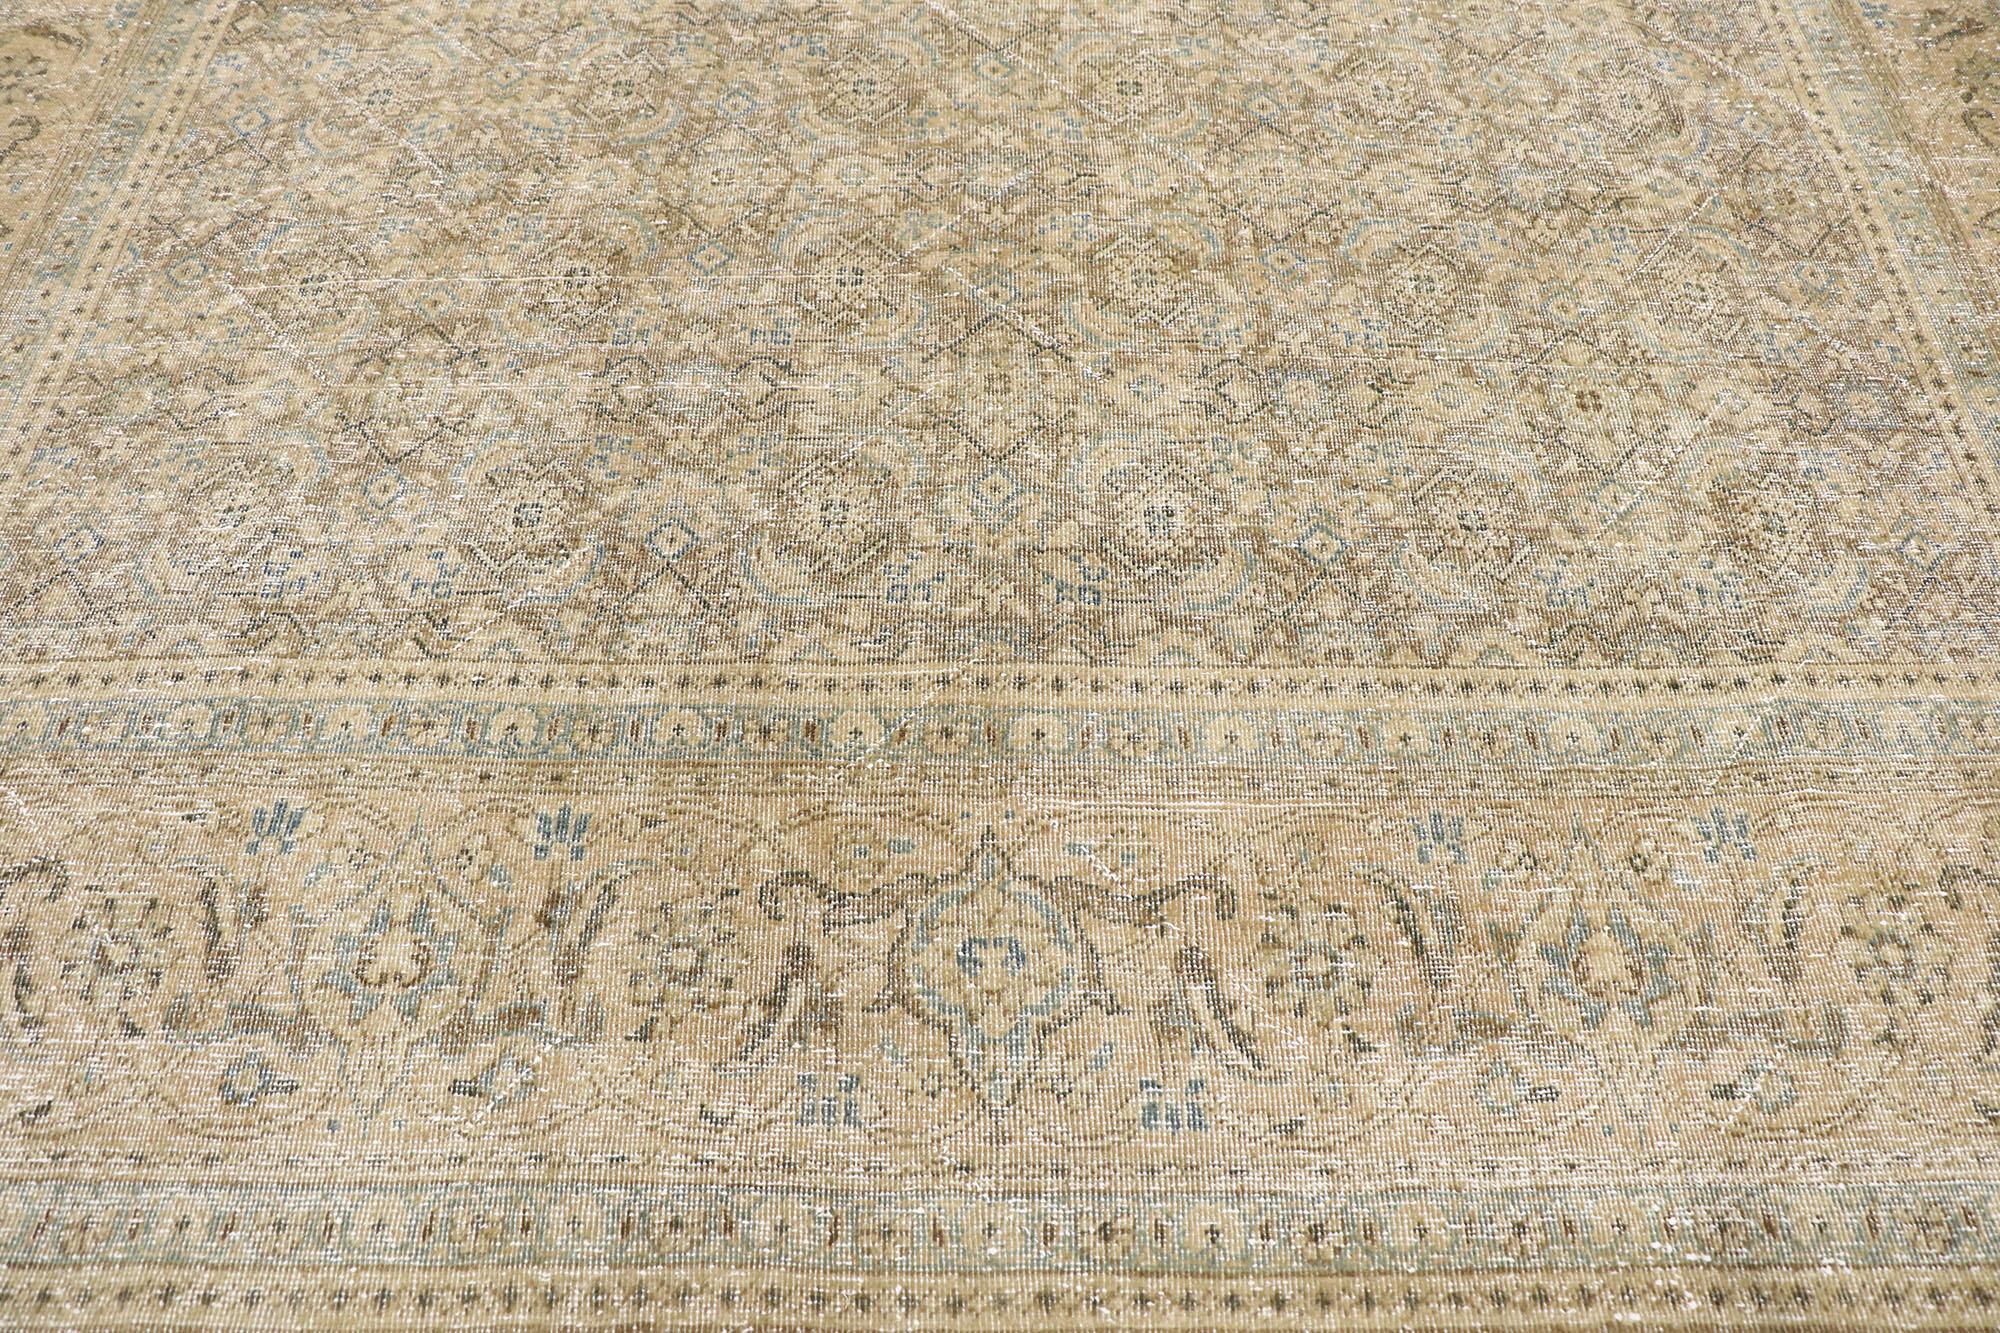 Hand-Knotted Distressed Antique Persian Mahal Rug with Modern Rustic Shaker Style